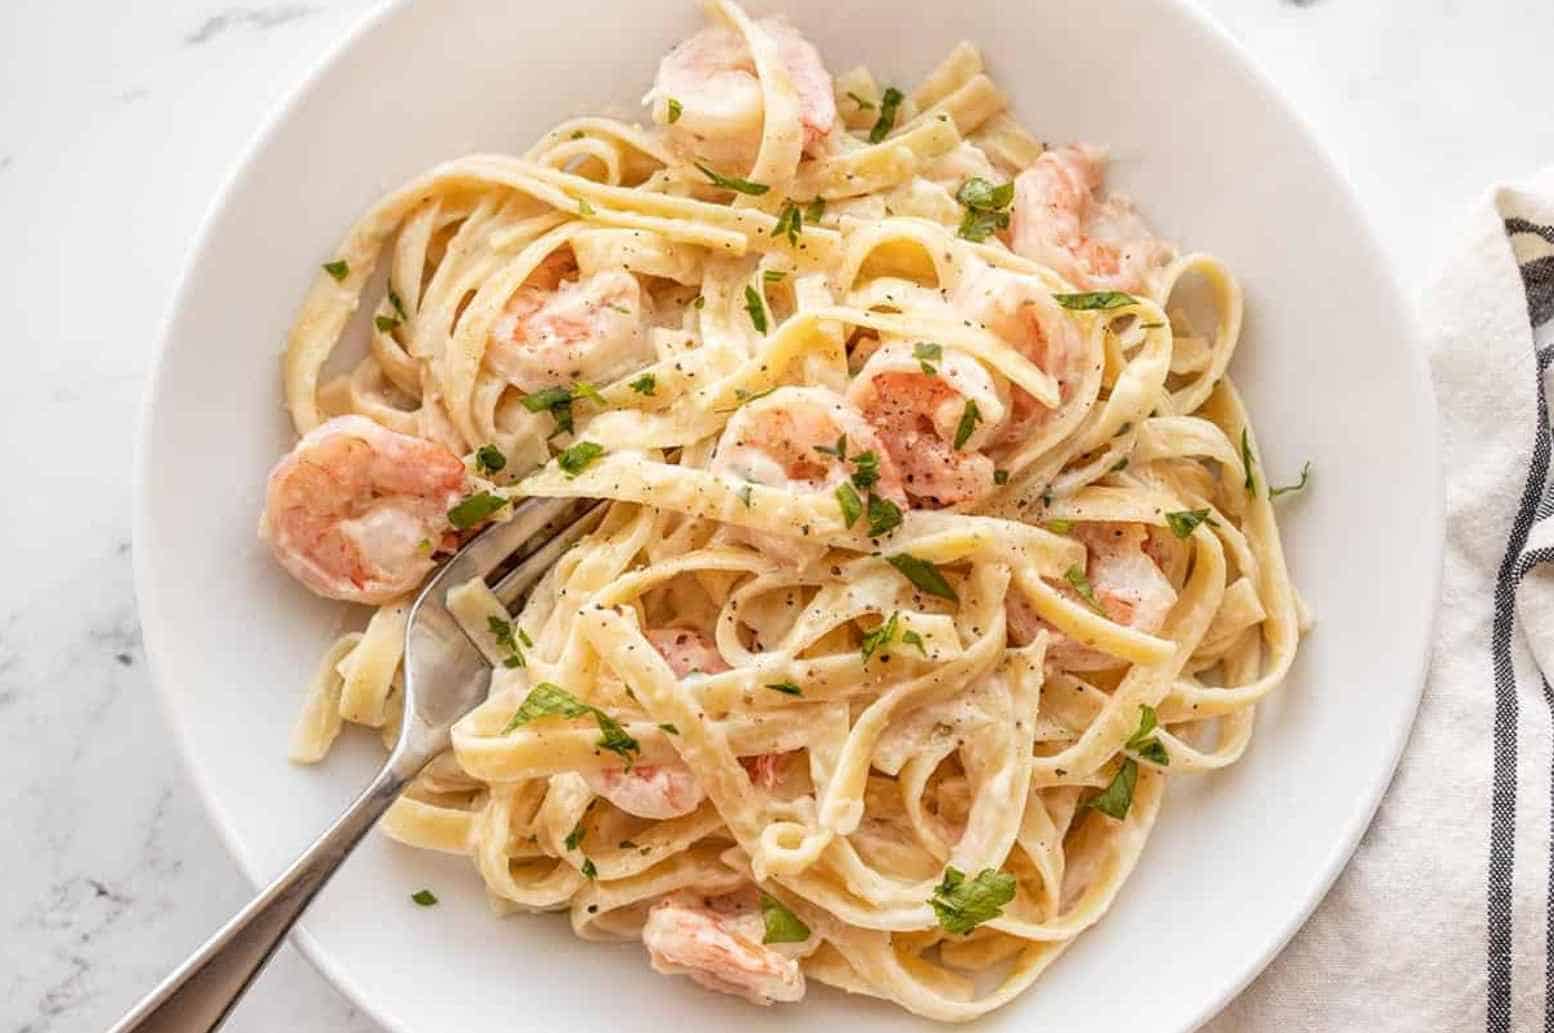 What Wine Goes With Alfredo Pasta